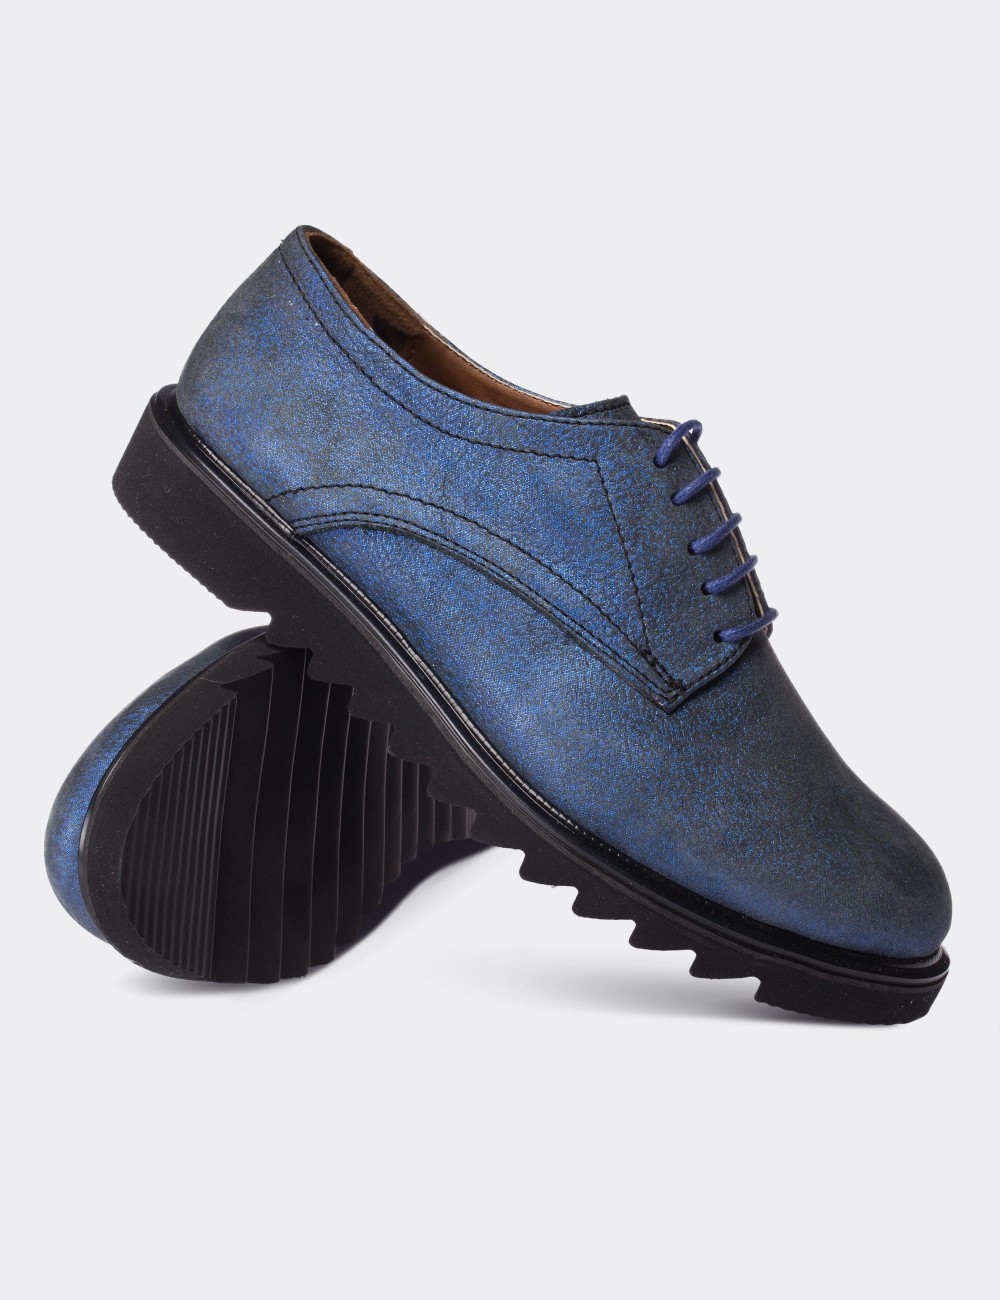 Blue  Leather Lace-up Shoes - 01430ZMVIP01